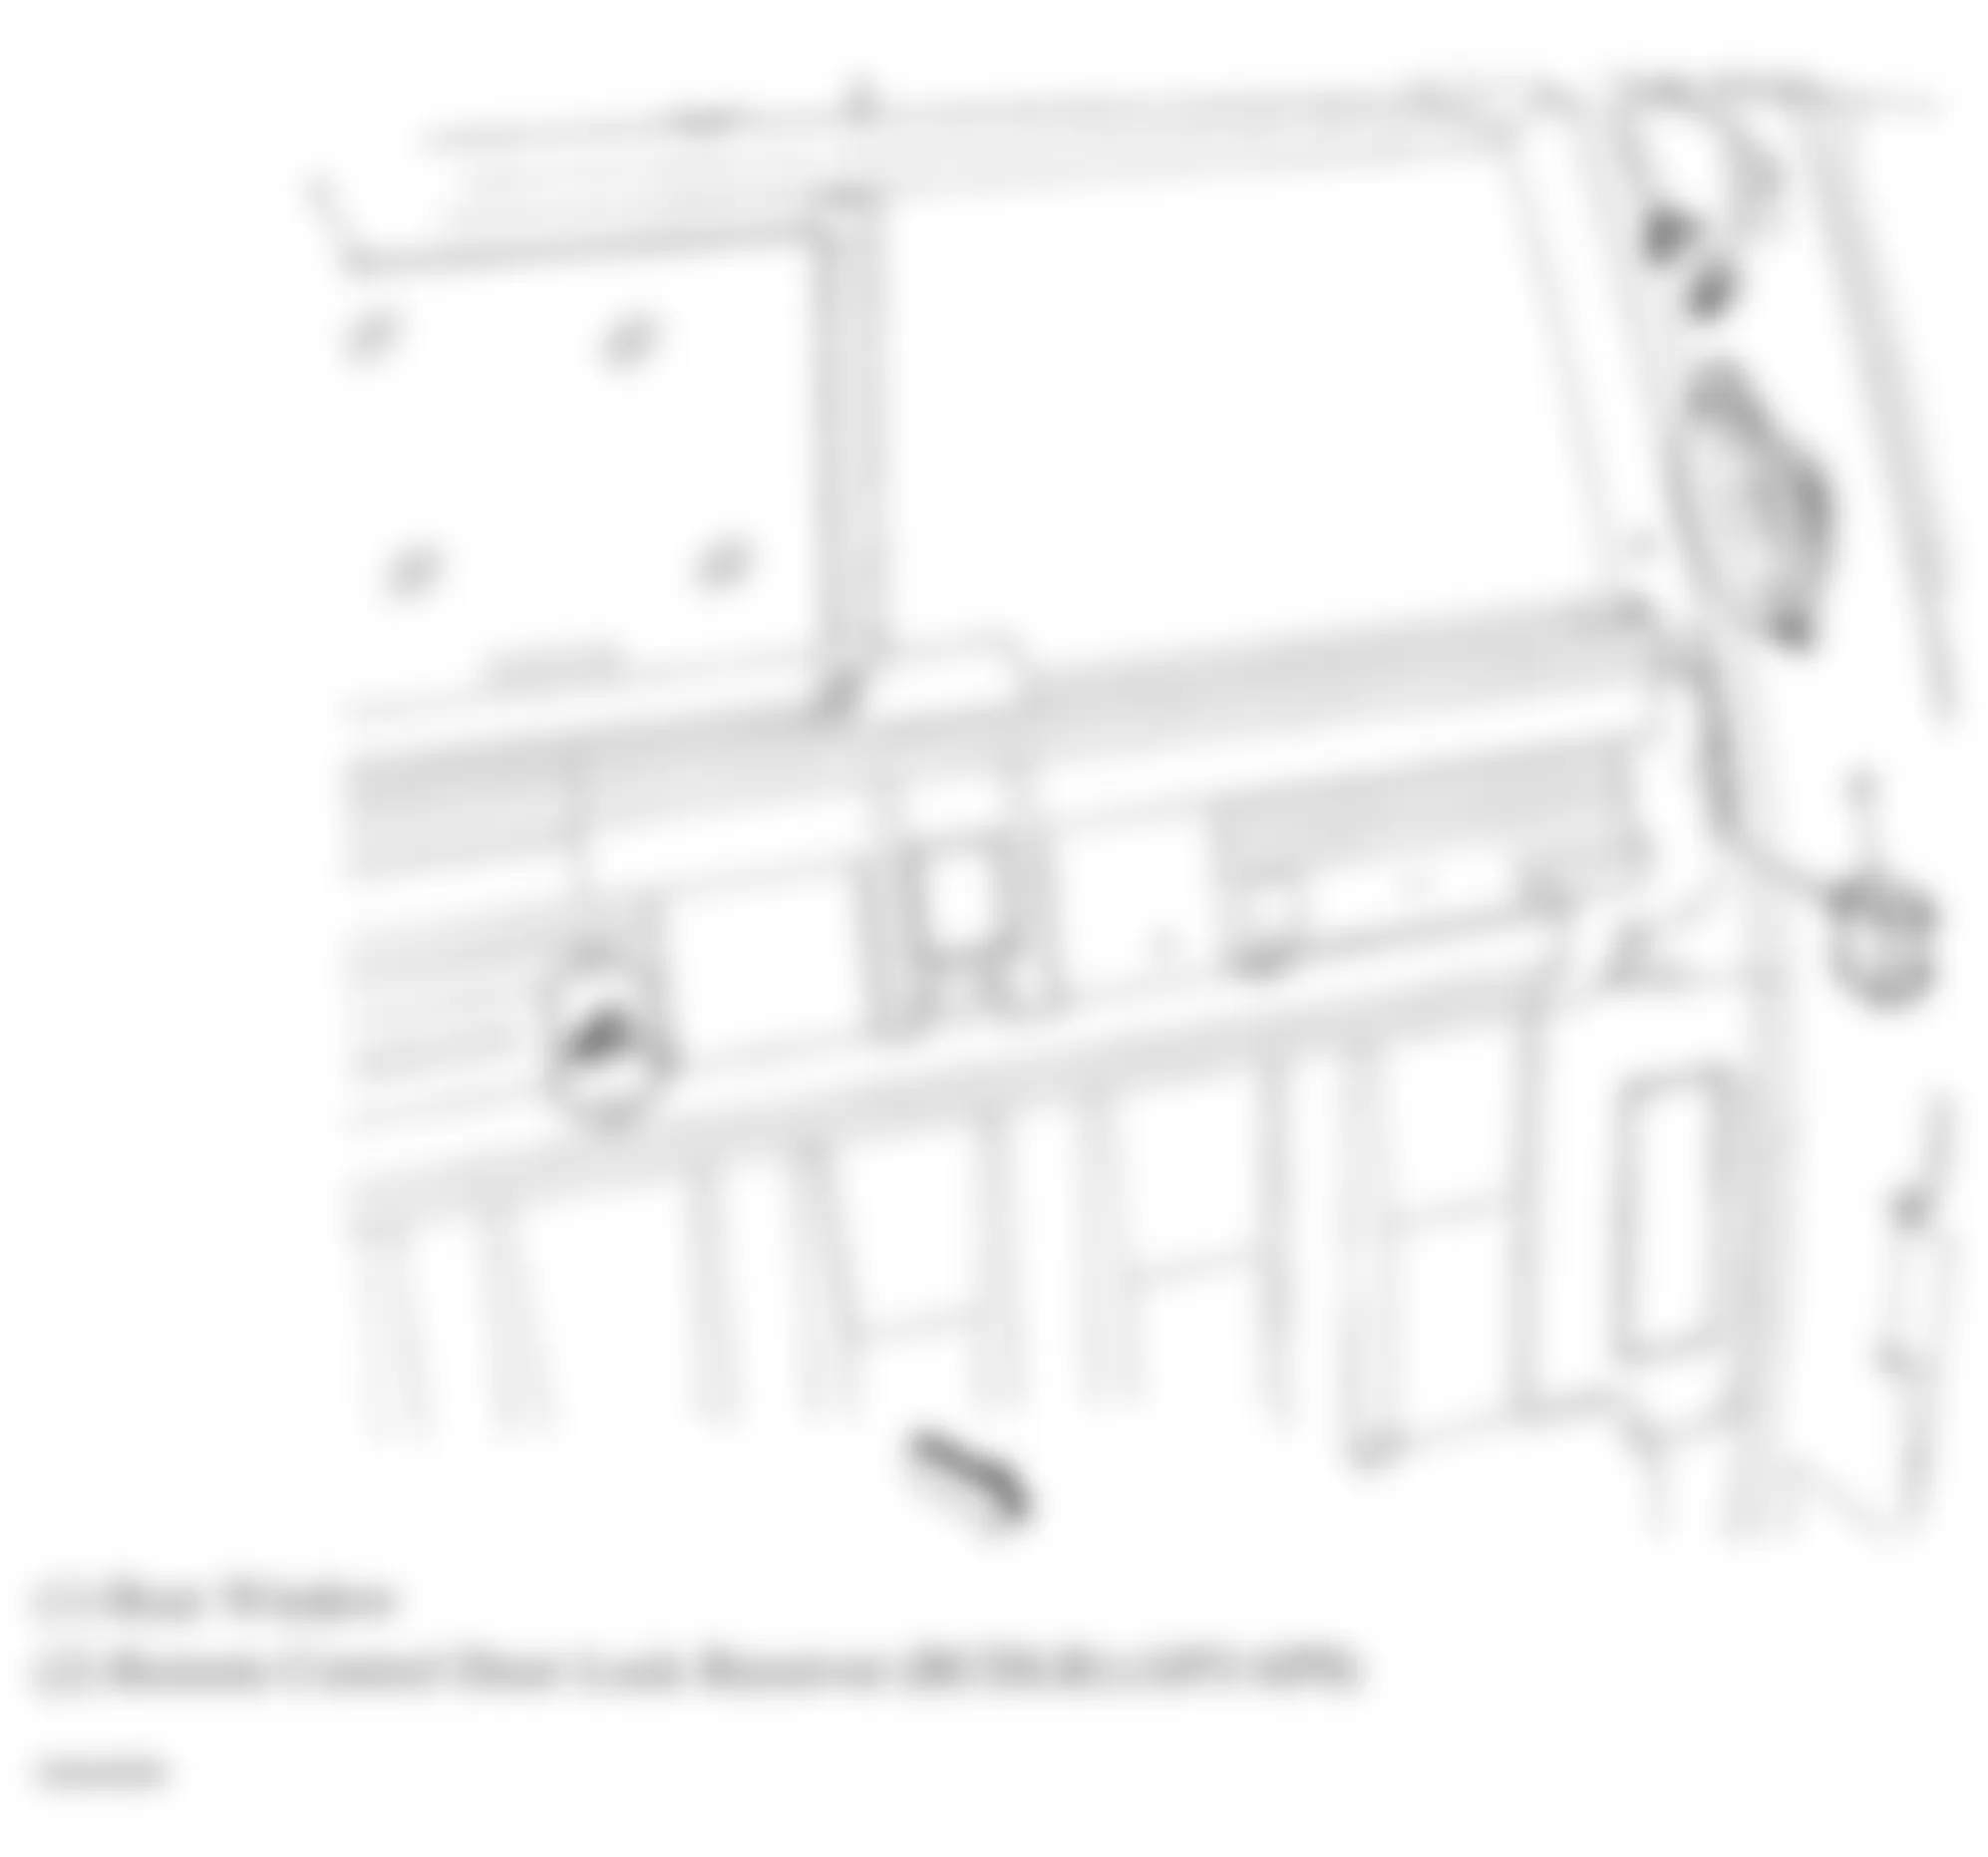 GMC Sierra 2500 HD 2009 - Component Locations -  Left Rear Of Passenger Compartment